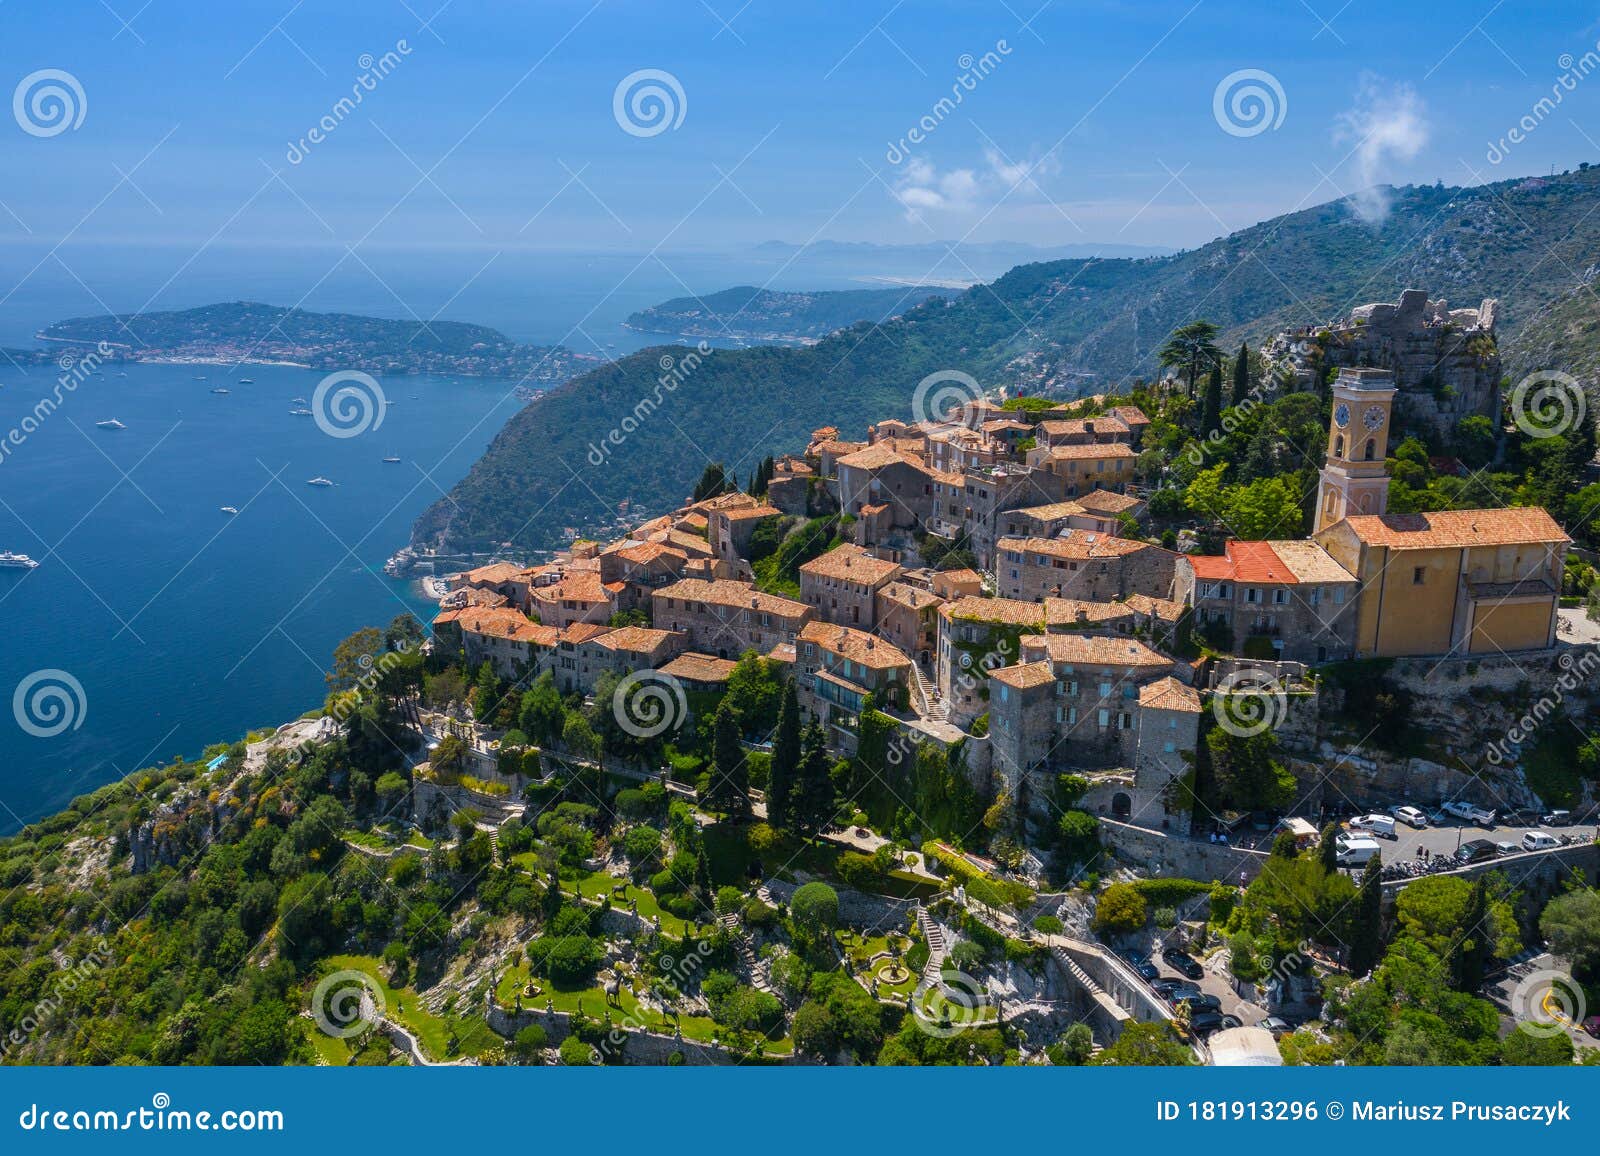 aerial view of medieval village of eze, on the mediterranean coastline landscape and mountains, french riviera coast, cote d`azur